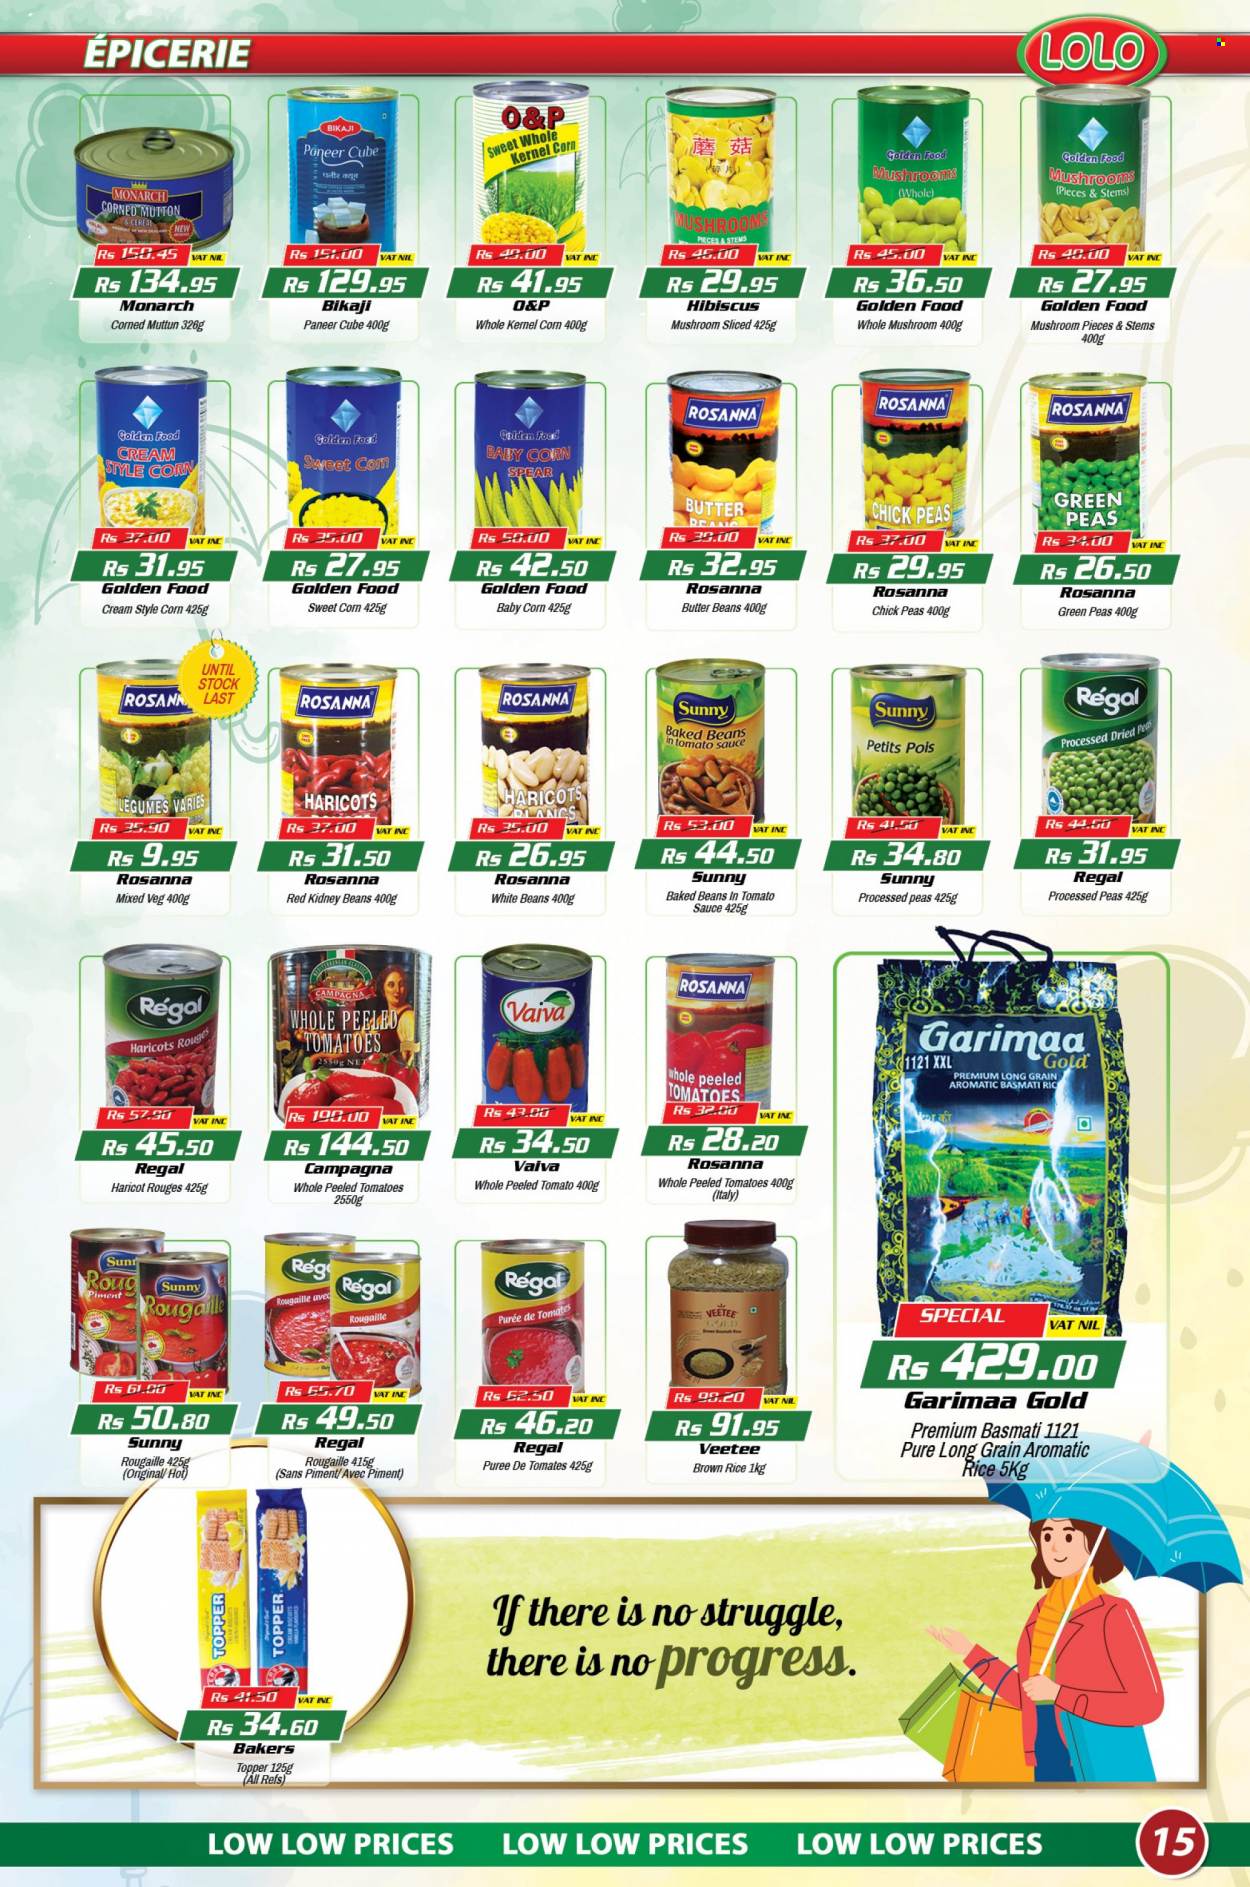 thumbnail - LOLO Hyper Catalogue - 26.01.2023 - 15.02.2023 - Sales products - mushrooms, beans, tomatoes, peas, sweet corn, paneer, kidney beans, baked beans, cereals, basmati rice, brown rice, rice, mutton meat, Bakers. Page 15.